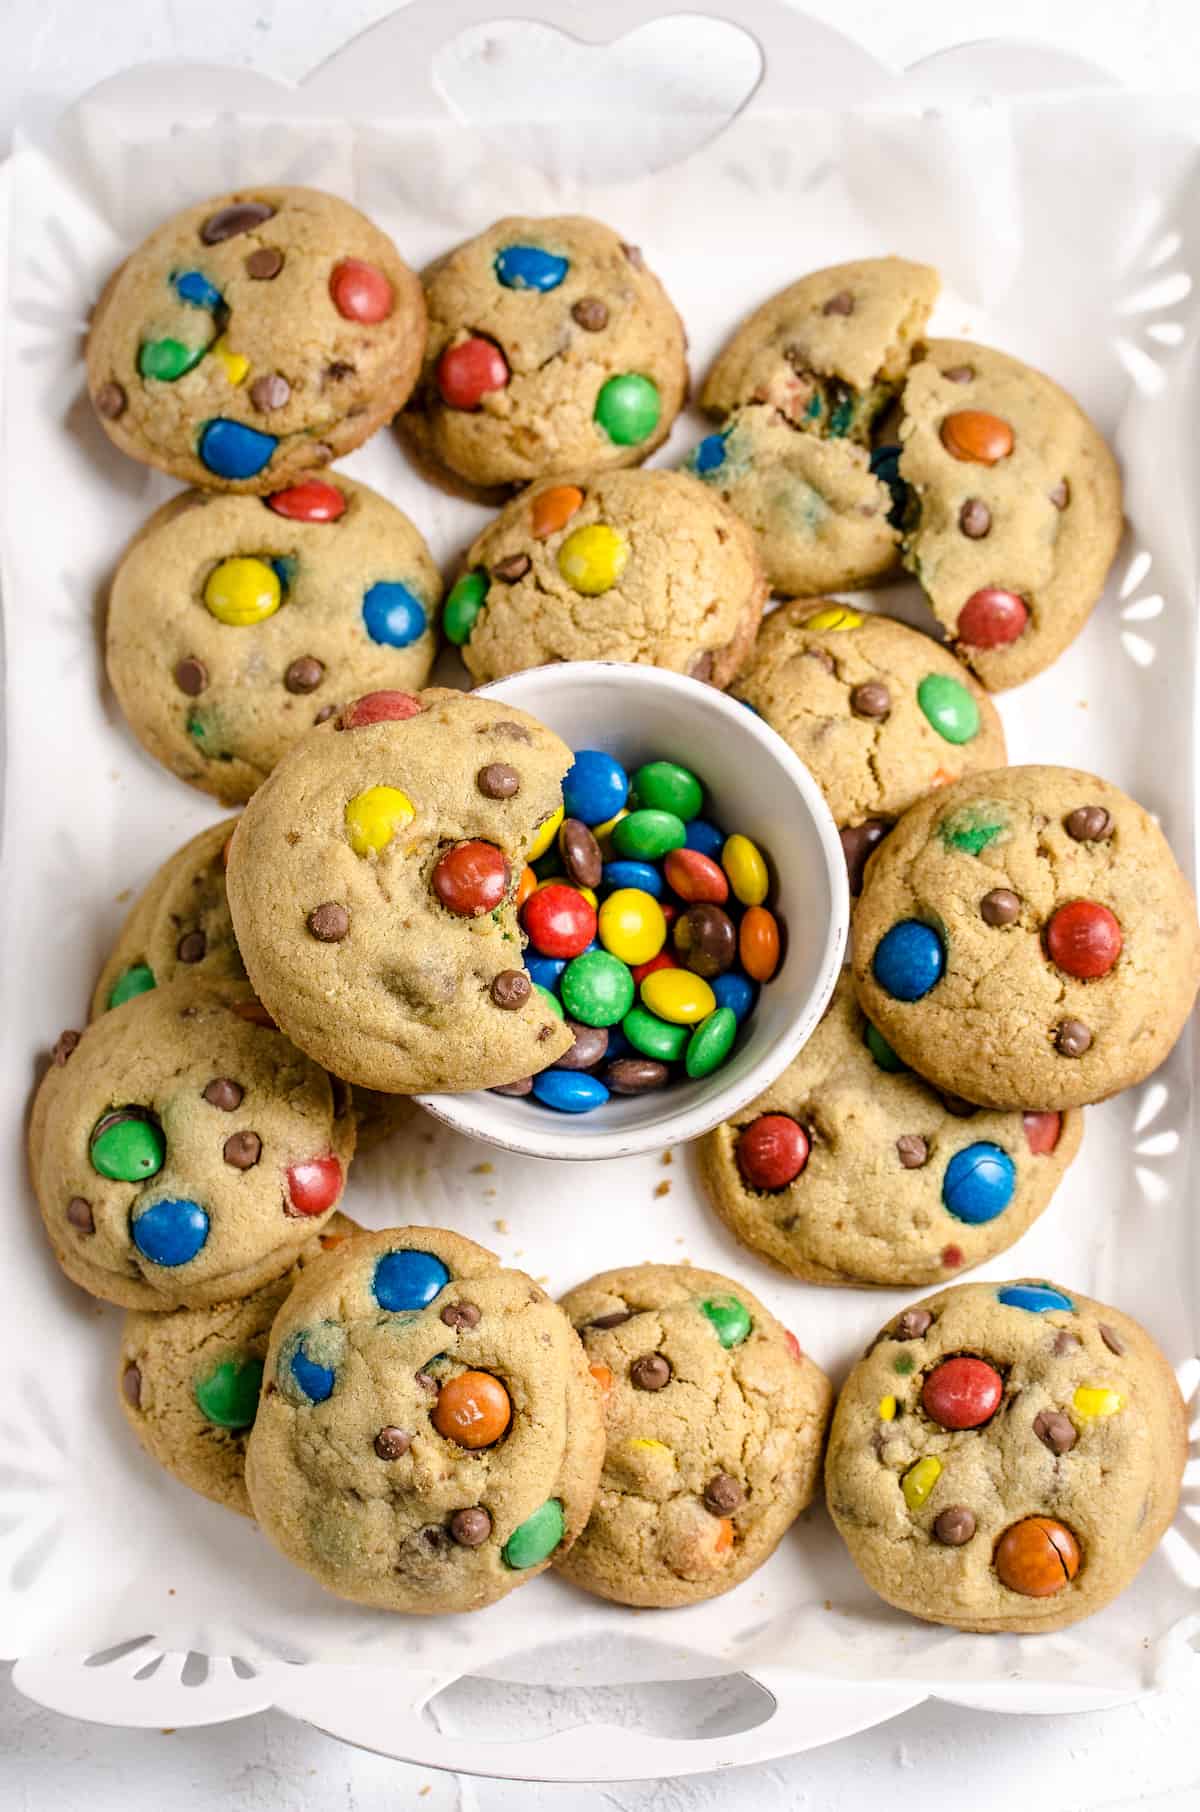 A batch of M&M cookies on a serving platter along with a bowl of M&Ms